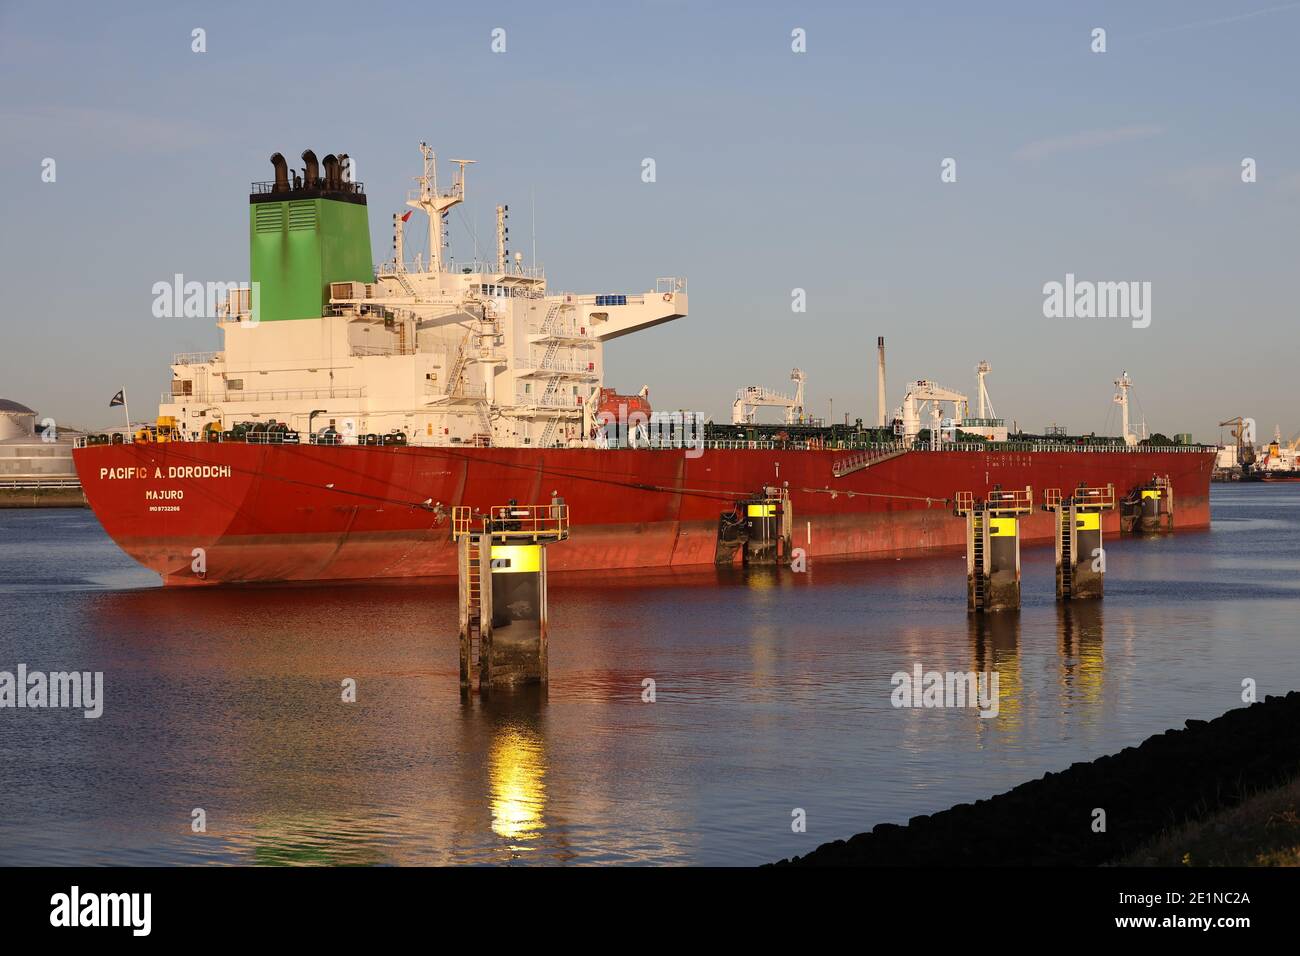 The crude oil tanker Pacific A. Dorodchi will be in the port of Rotterdam on September 18, 2020. Stock Photo